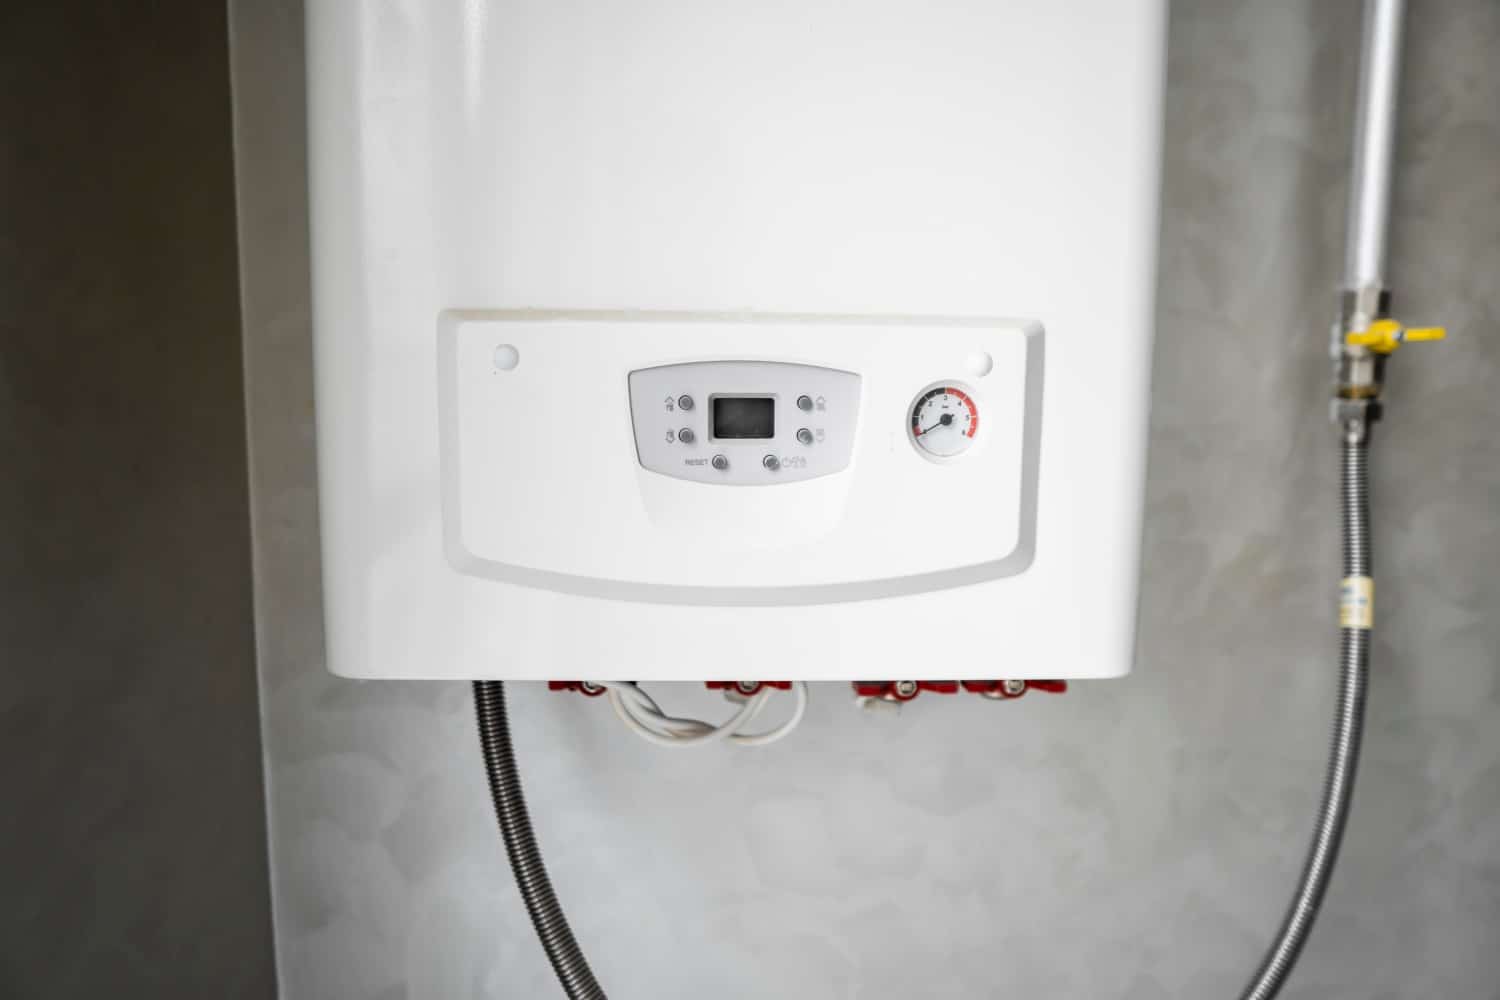 Tankless water heater eligible for 20 year warranty